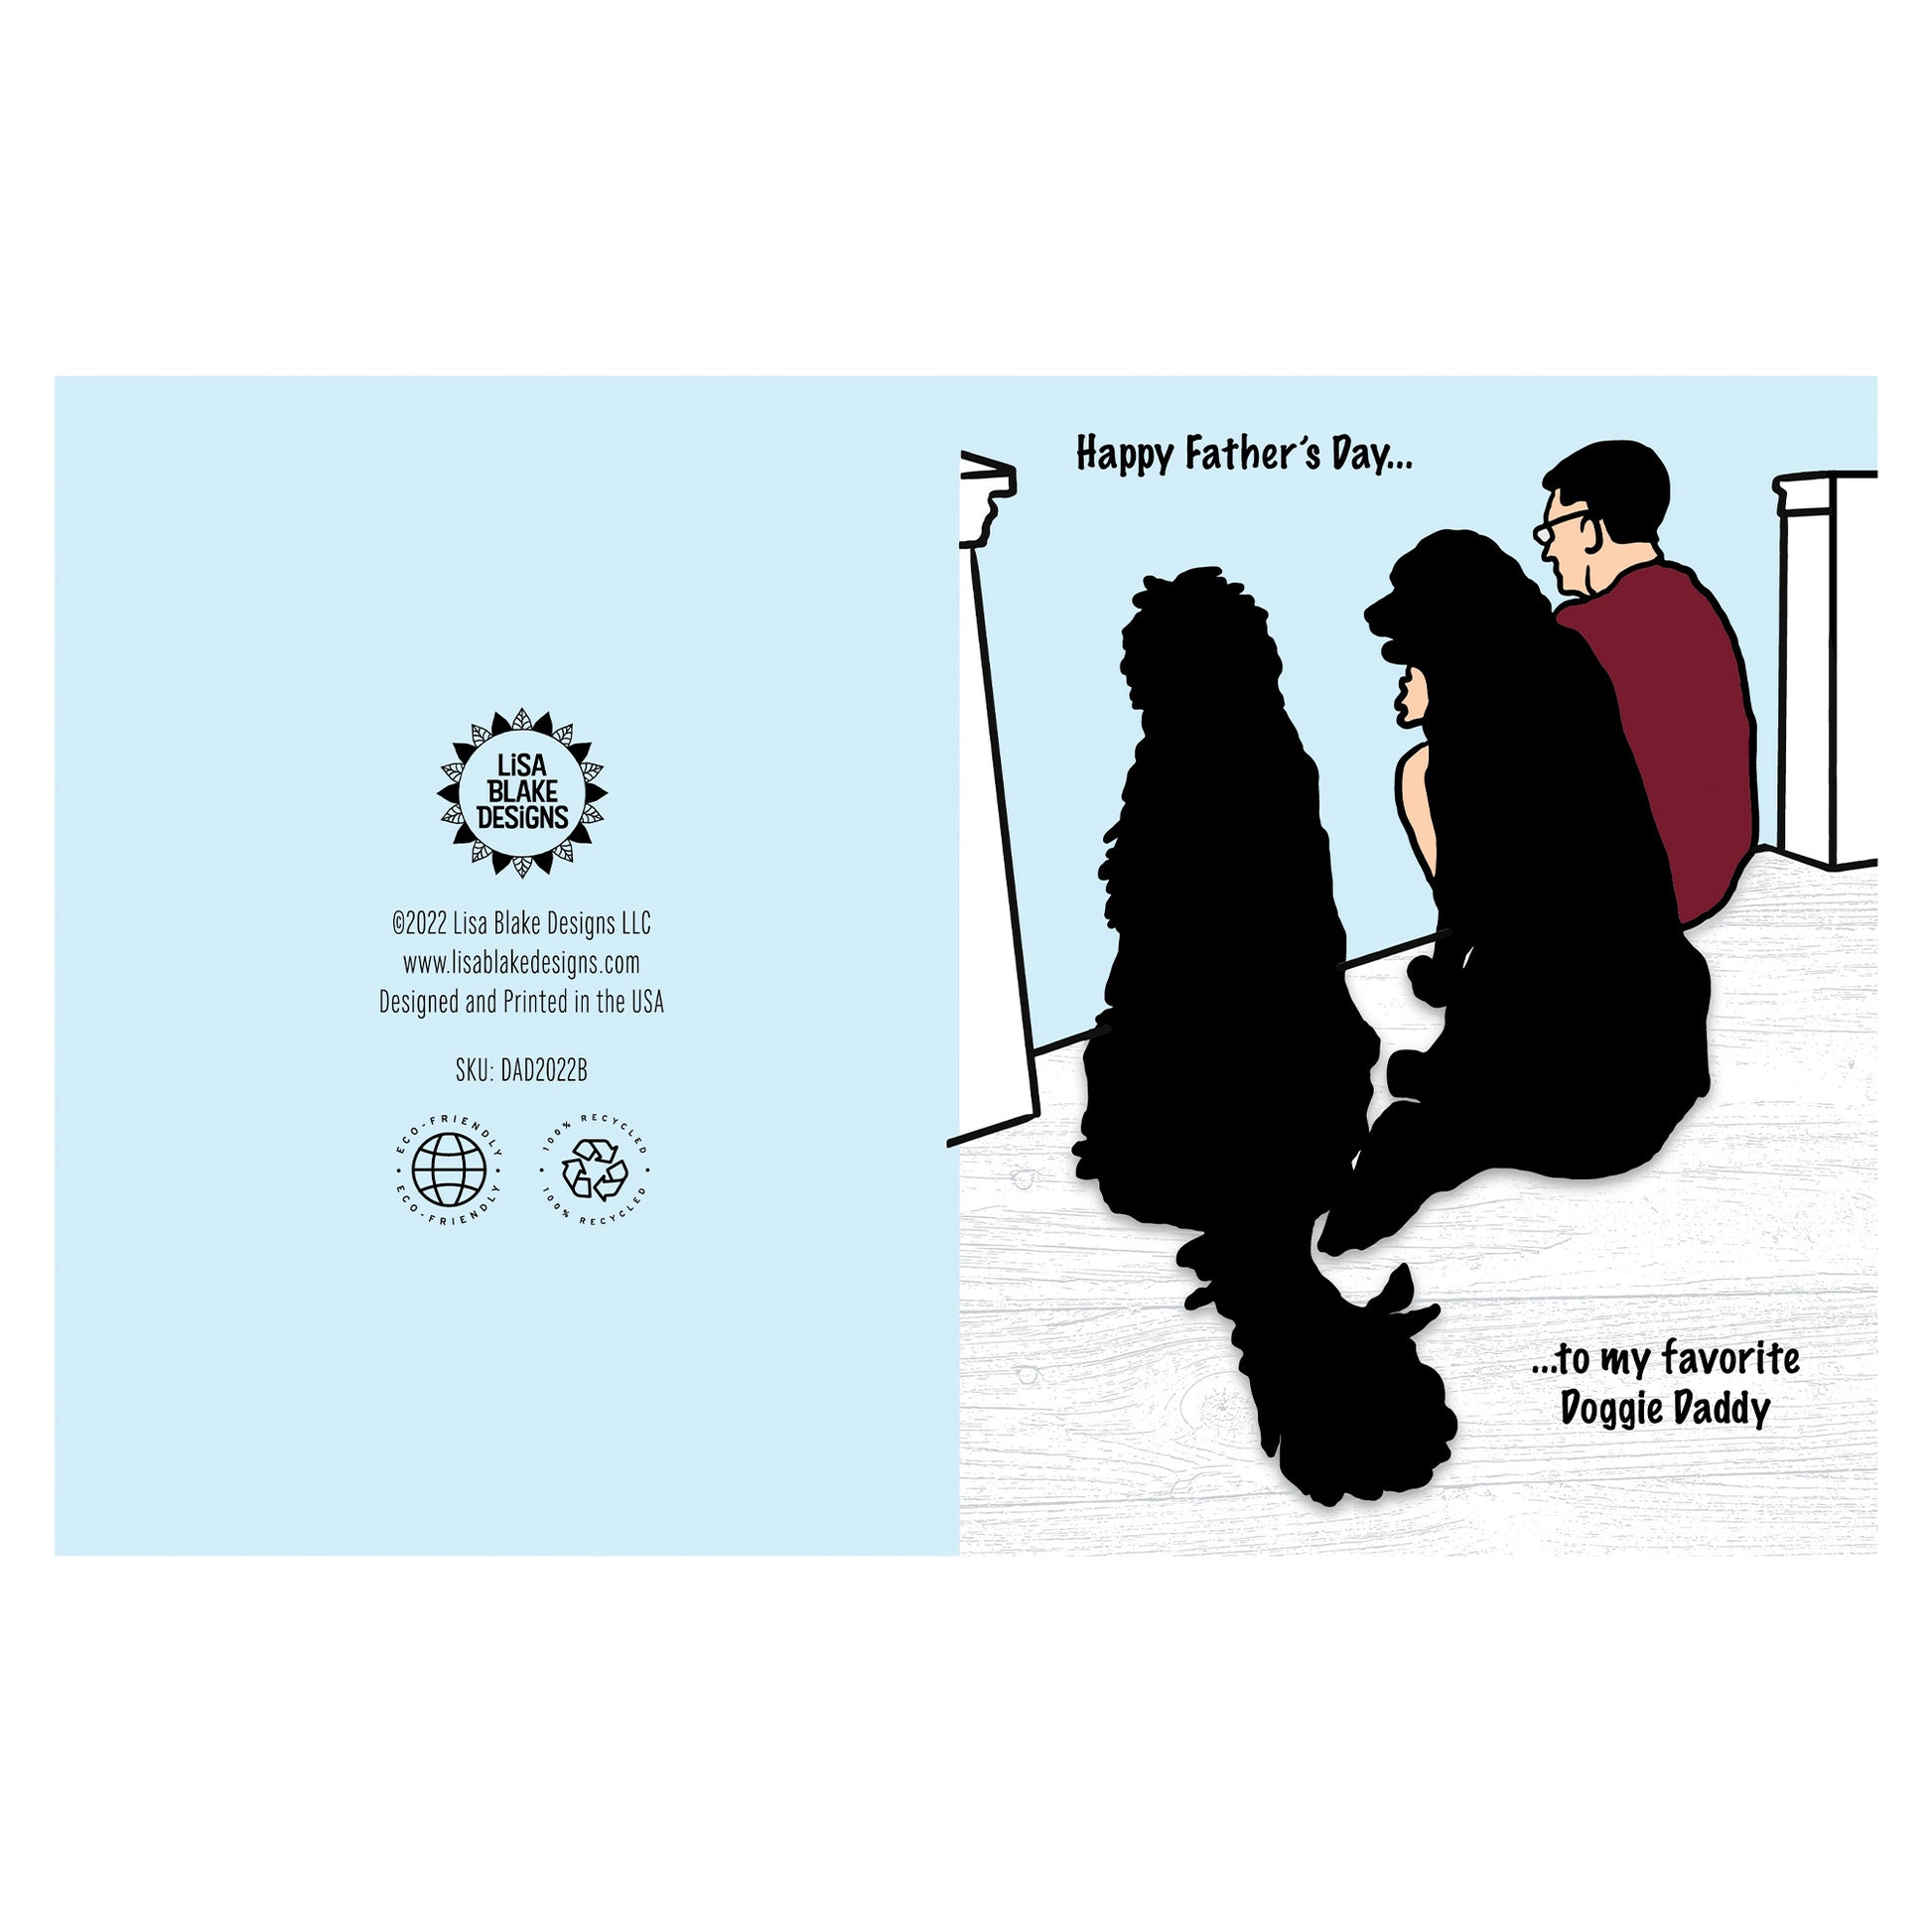 Full page display of Happy Father's Day Doggie Daddy Card. Digitally hand drawn inspired by a photo of my husband and our two dogs. Reads, "Happy Father's Day to my favorite Doggie Daddy".